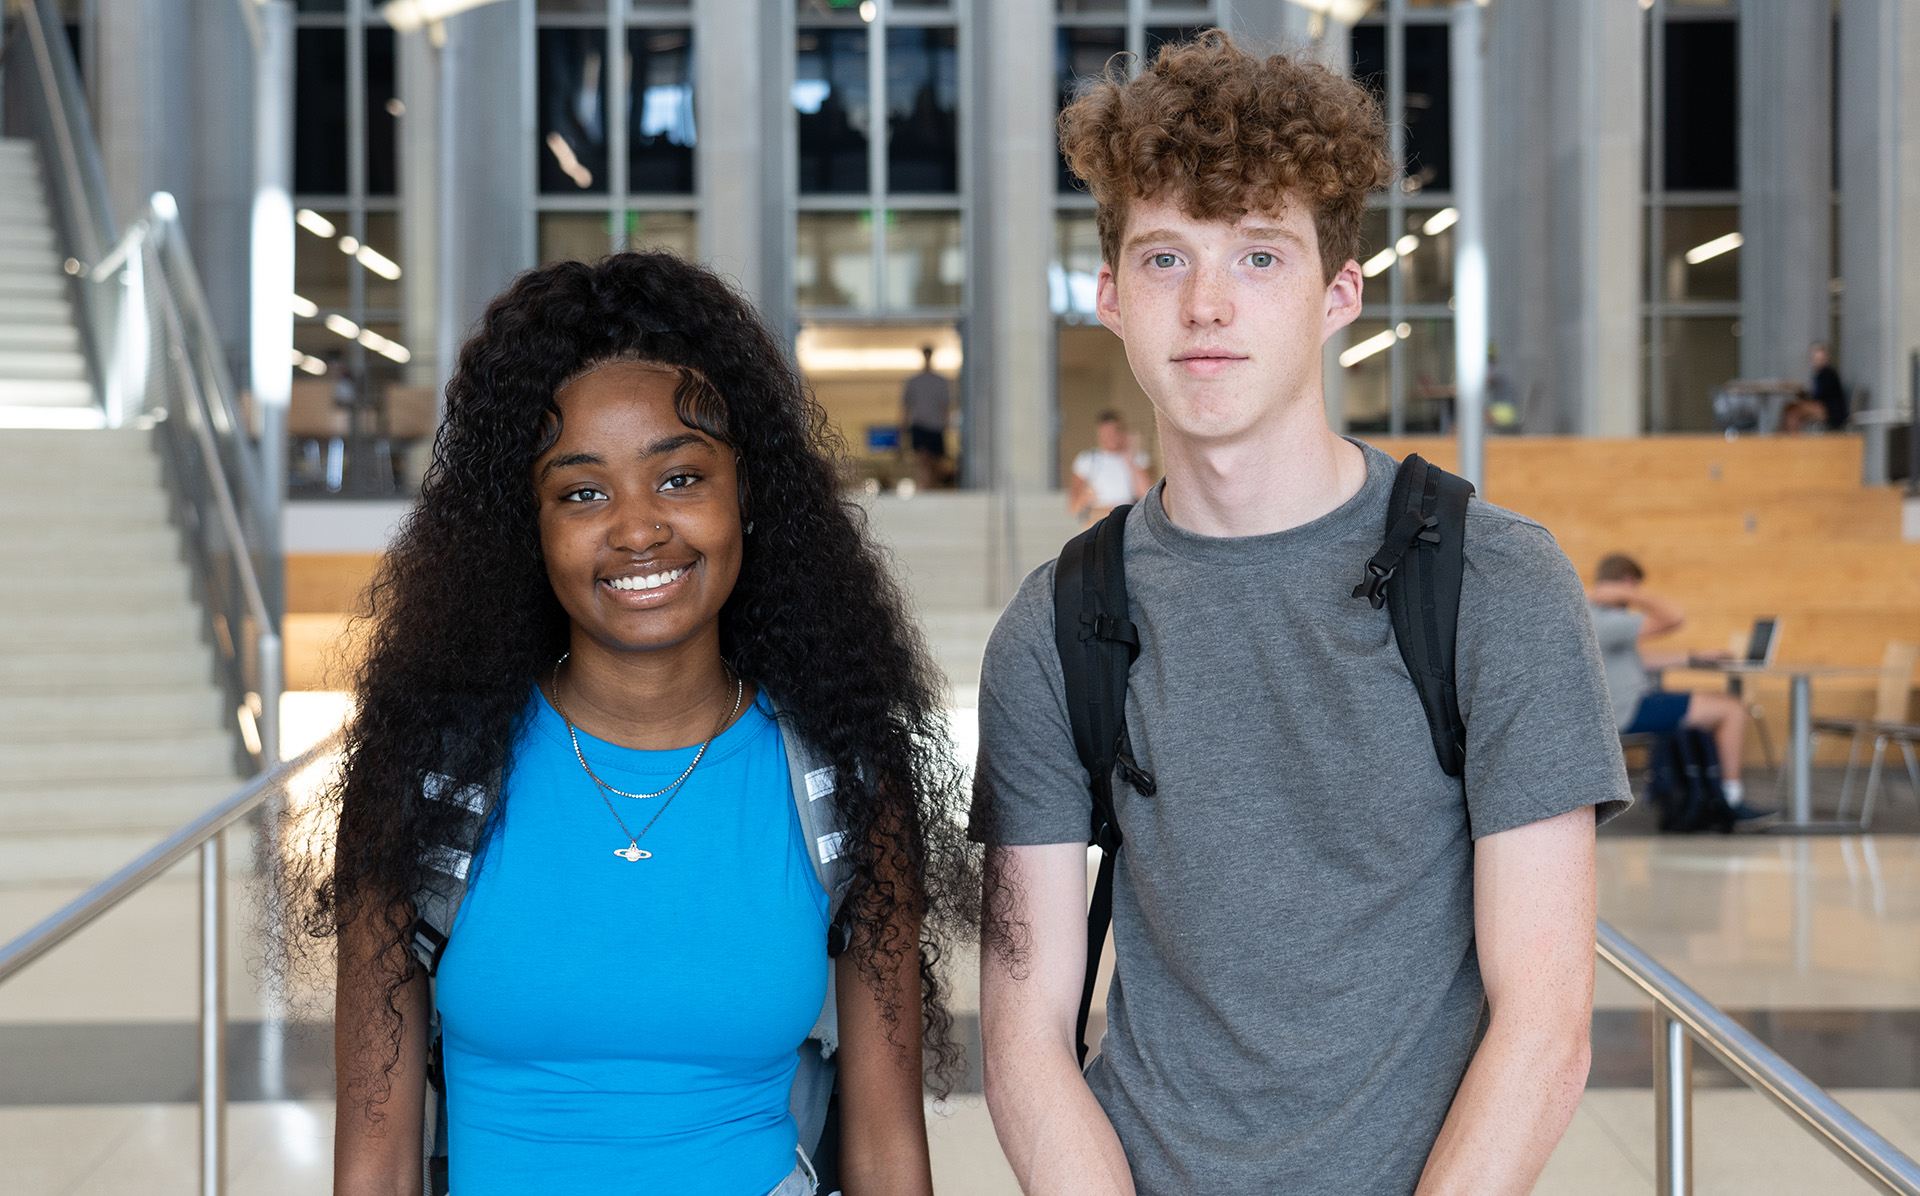 black female and white male student standing side by side in a library with their backpacks on